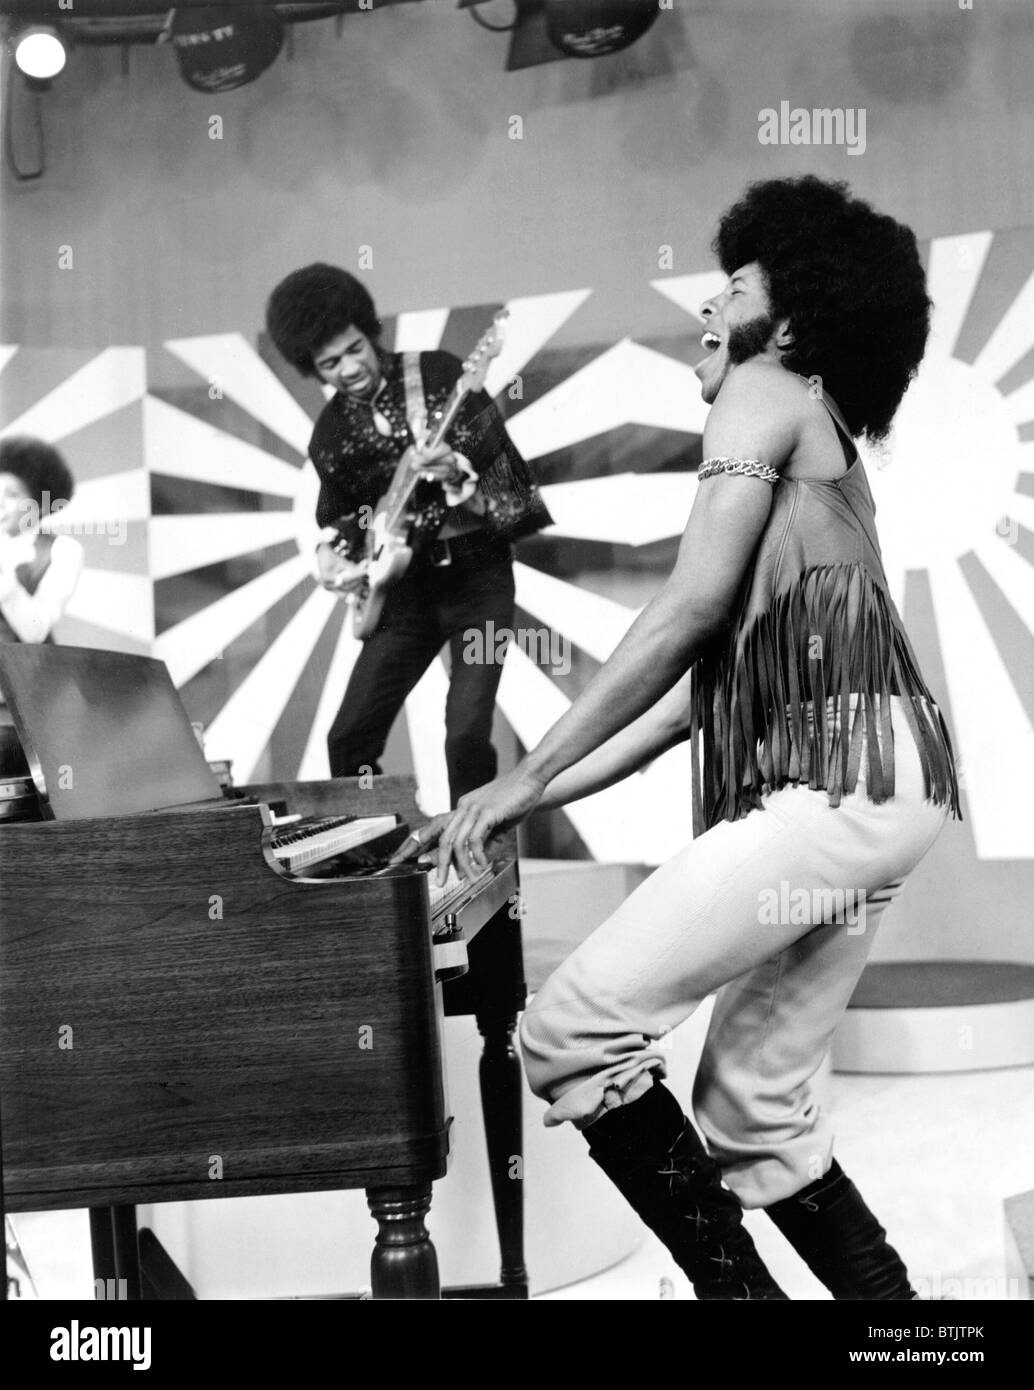 SLY AND THE FAMILY STONE performing Everyday People on UPBEAT, 1972. Stock Photo